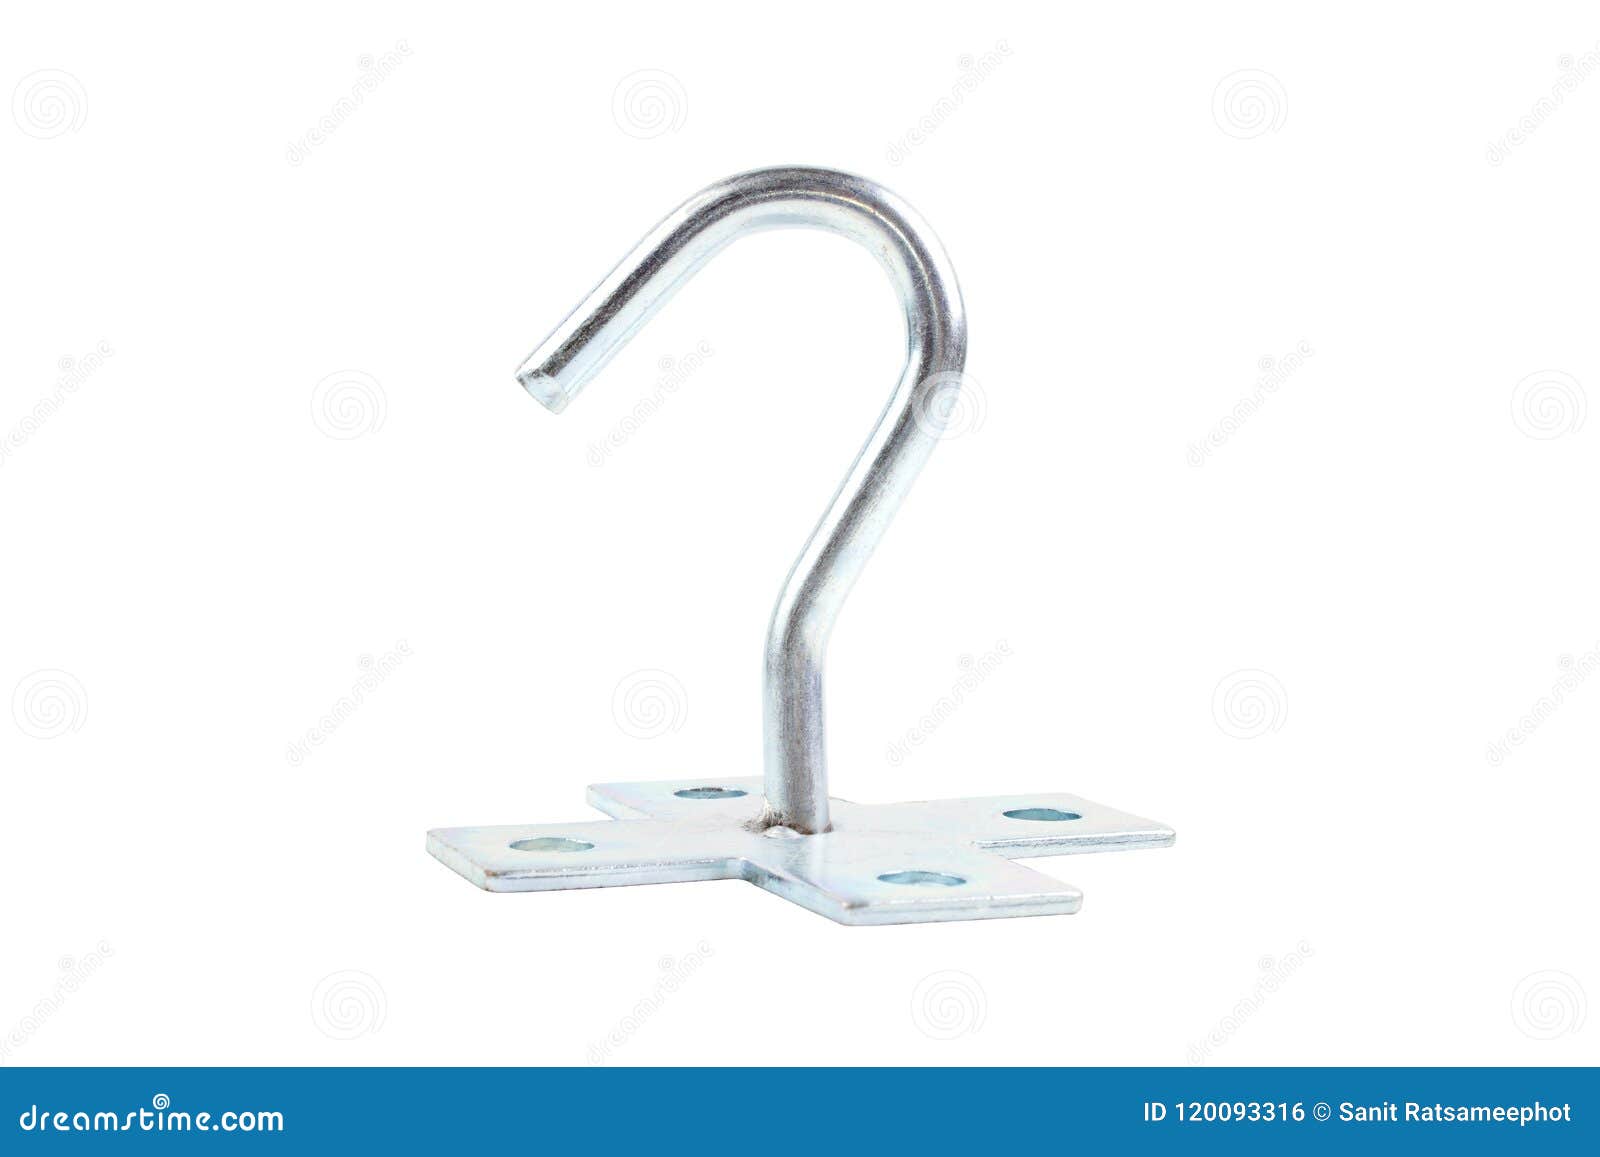 Large Steel Hook For Fixtures On Wall Stock Photo Image Of